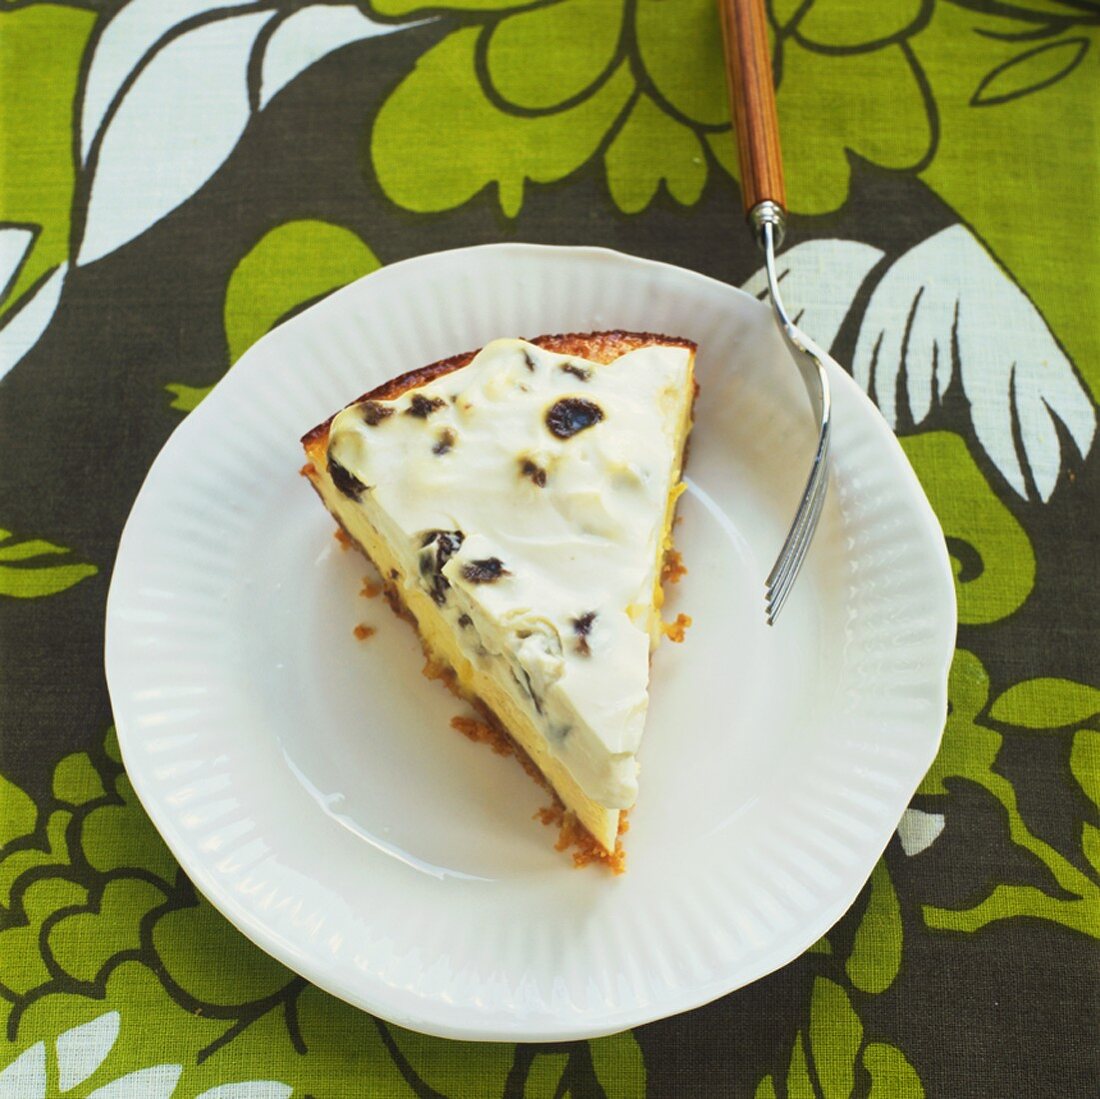 A piece of cheesecake with raisin cream topping